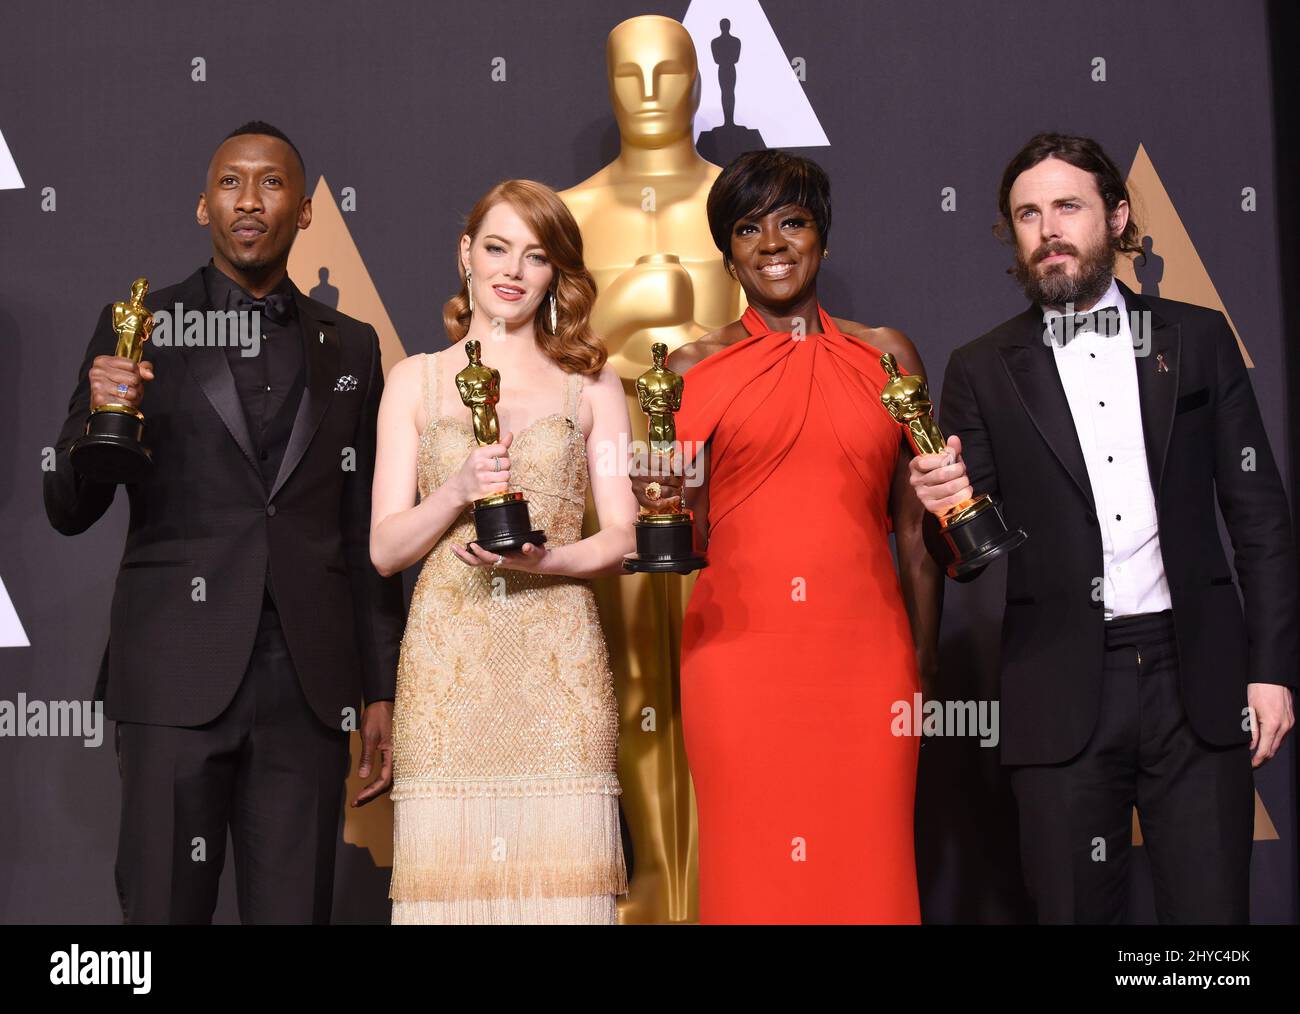 Mahershala Ali, Emma Stone, Viola Davis and Casey Affleck in the press room at the 89th Academy Awards held at the Dolby Theatre in Hollywood, Los Angeles, USA. Stock Photo